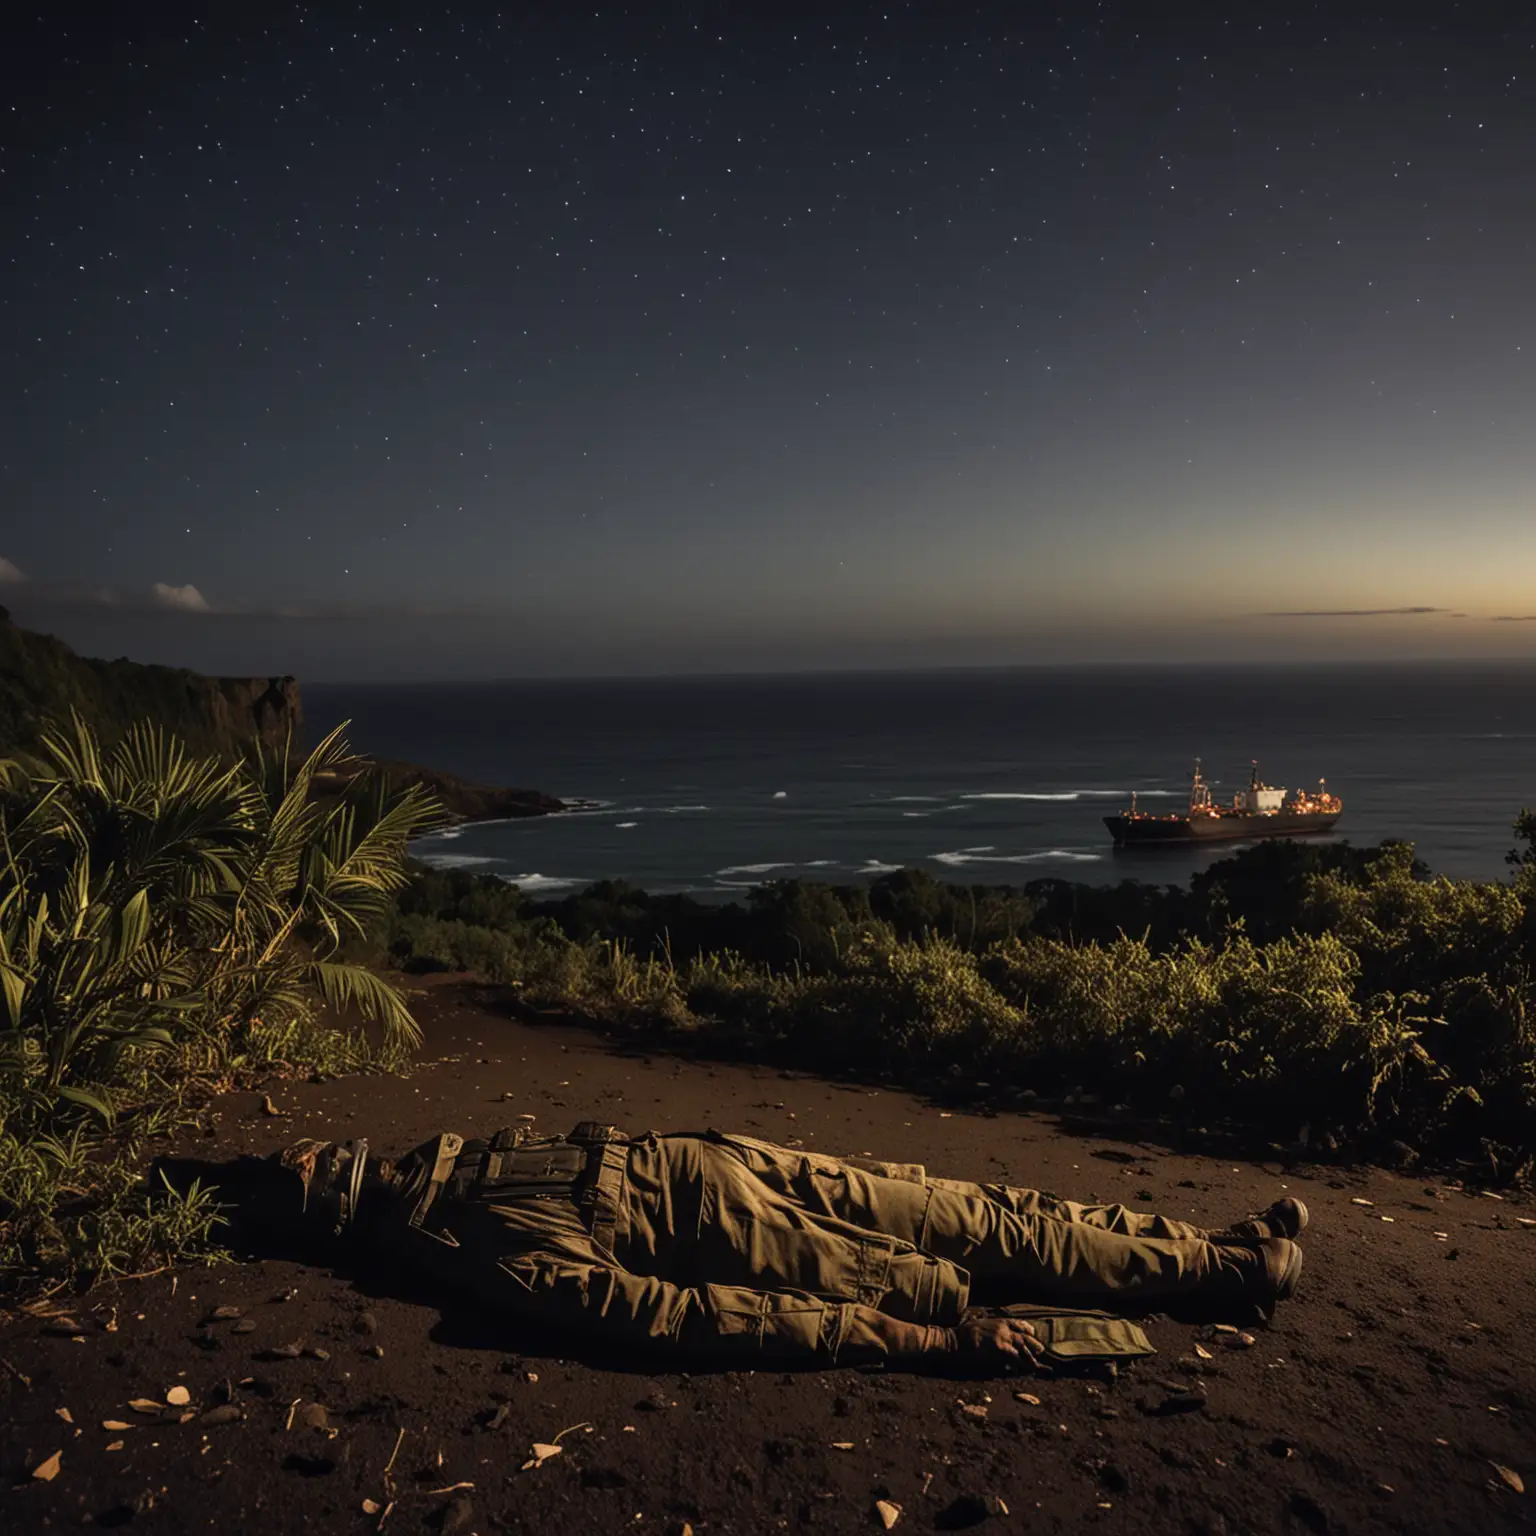 Tropical Island Night Ocean View with Cargo Ship Camouflaged Soldier